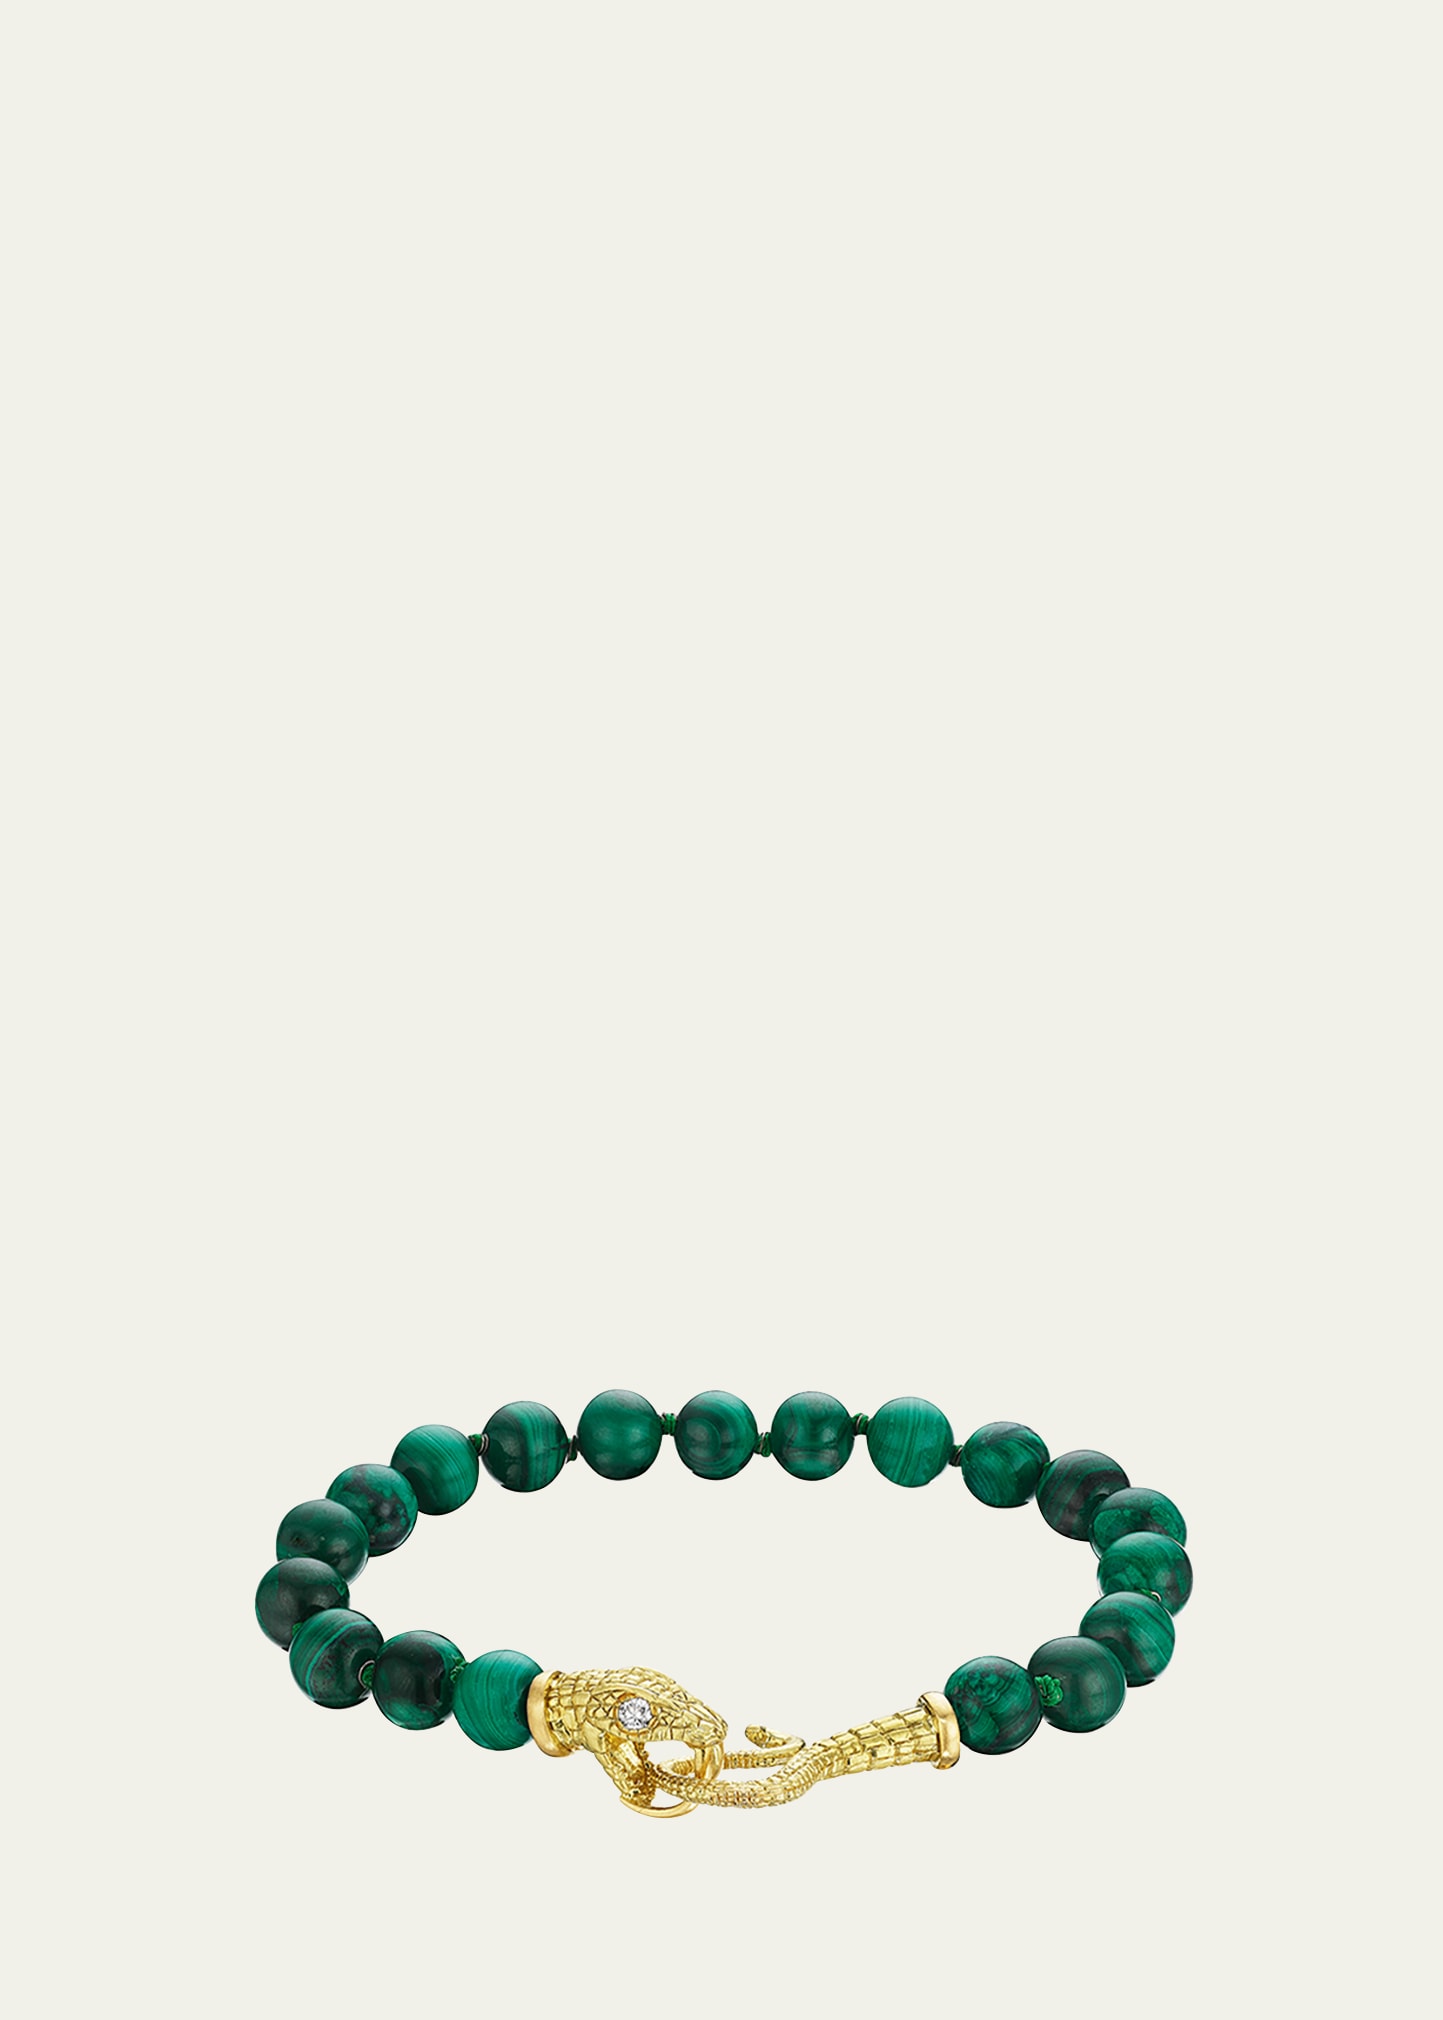 Anthony Lent Malachite Bead Serpent Bracelet In 18k Gold With Diamonds In Yg